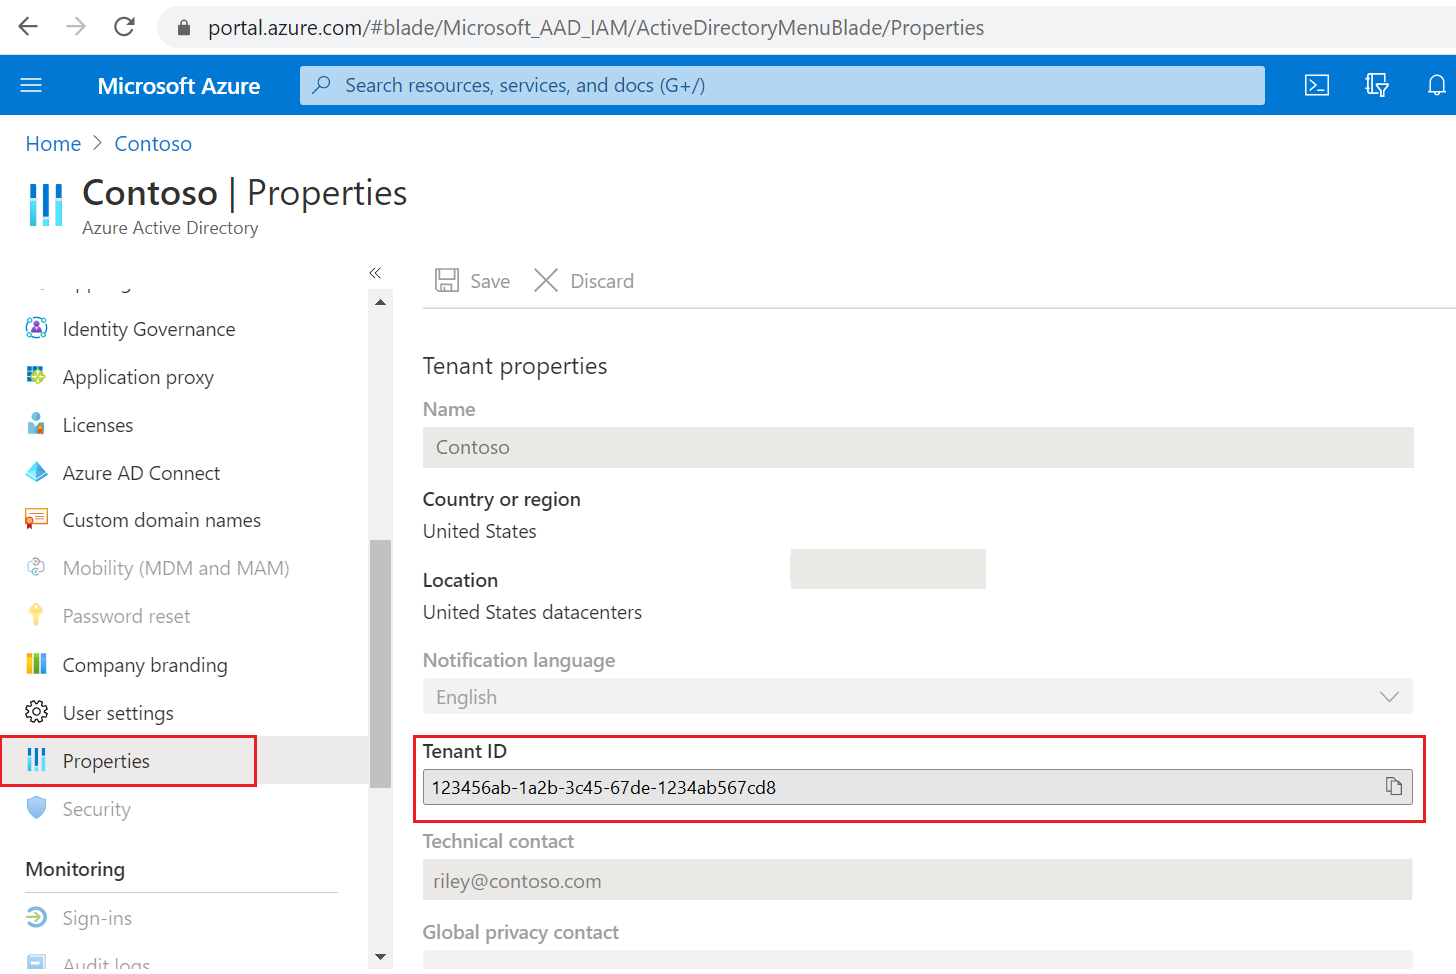 Screenshot showing the Properties page with the Tenant ID highlighted.